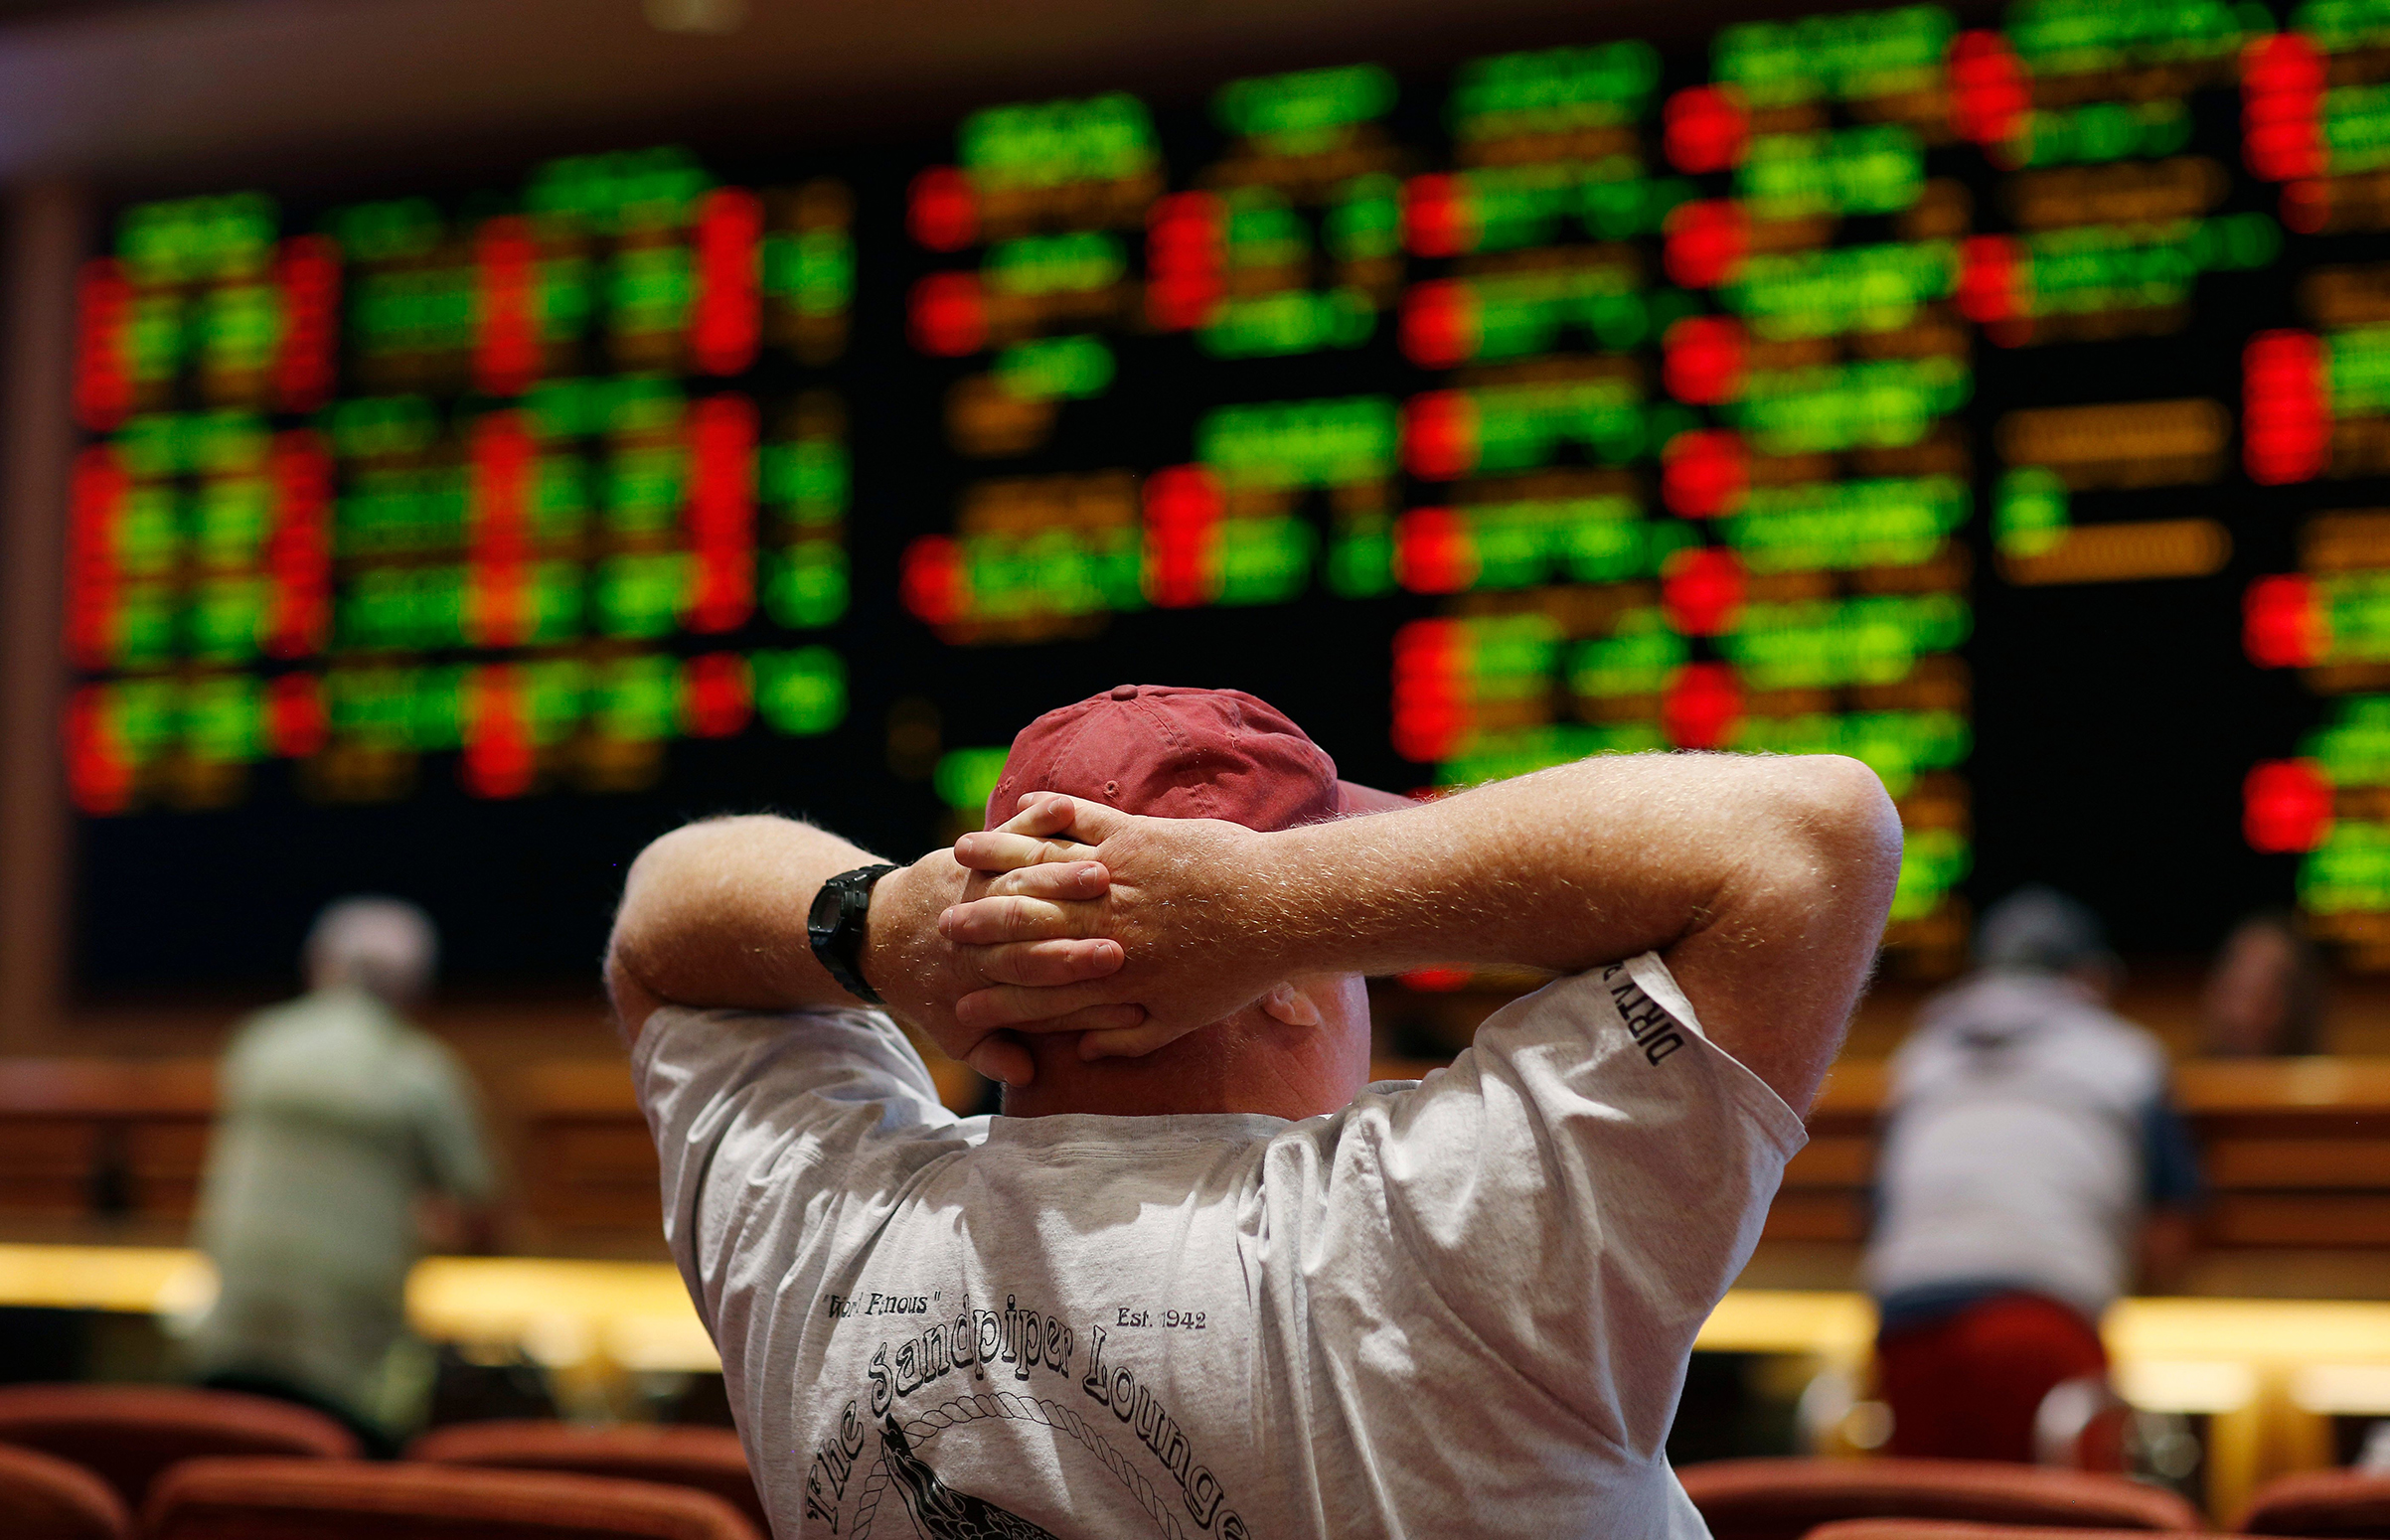 Add These 10 Mangets To Your Best Sport Betting Site